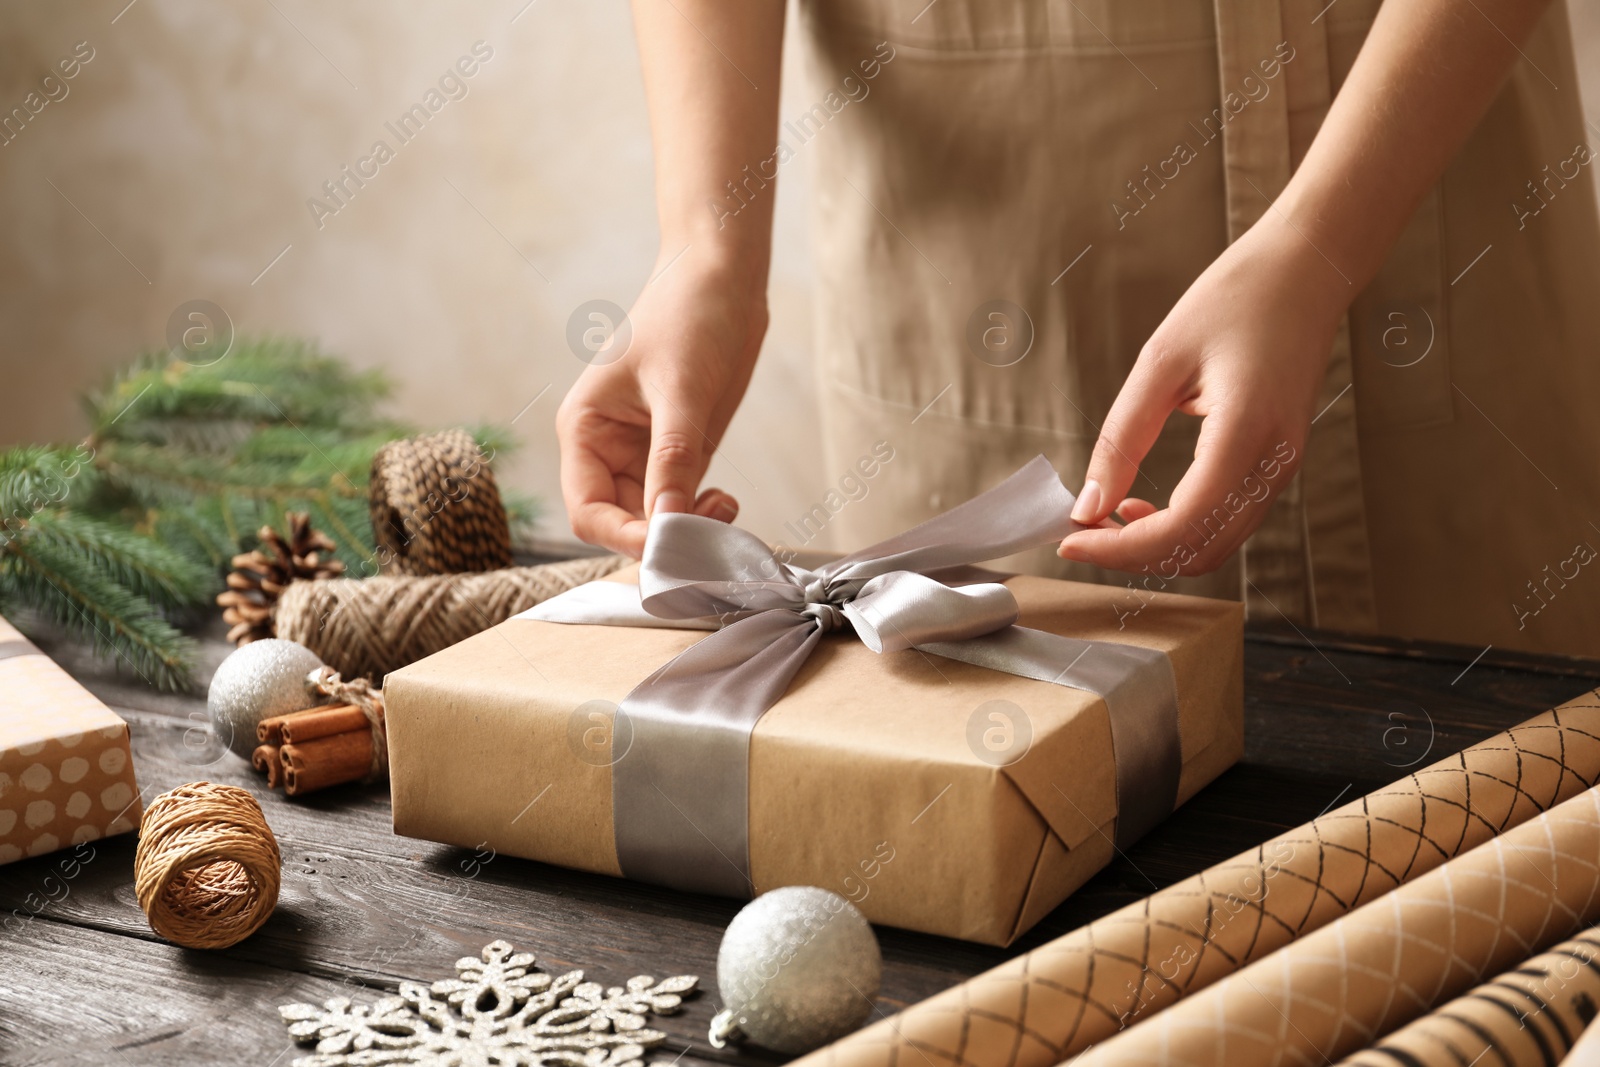 Photo of Woman wrapping Christmas gift at wooden table